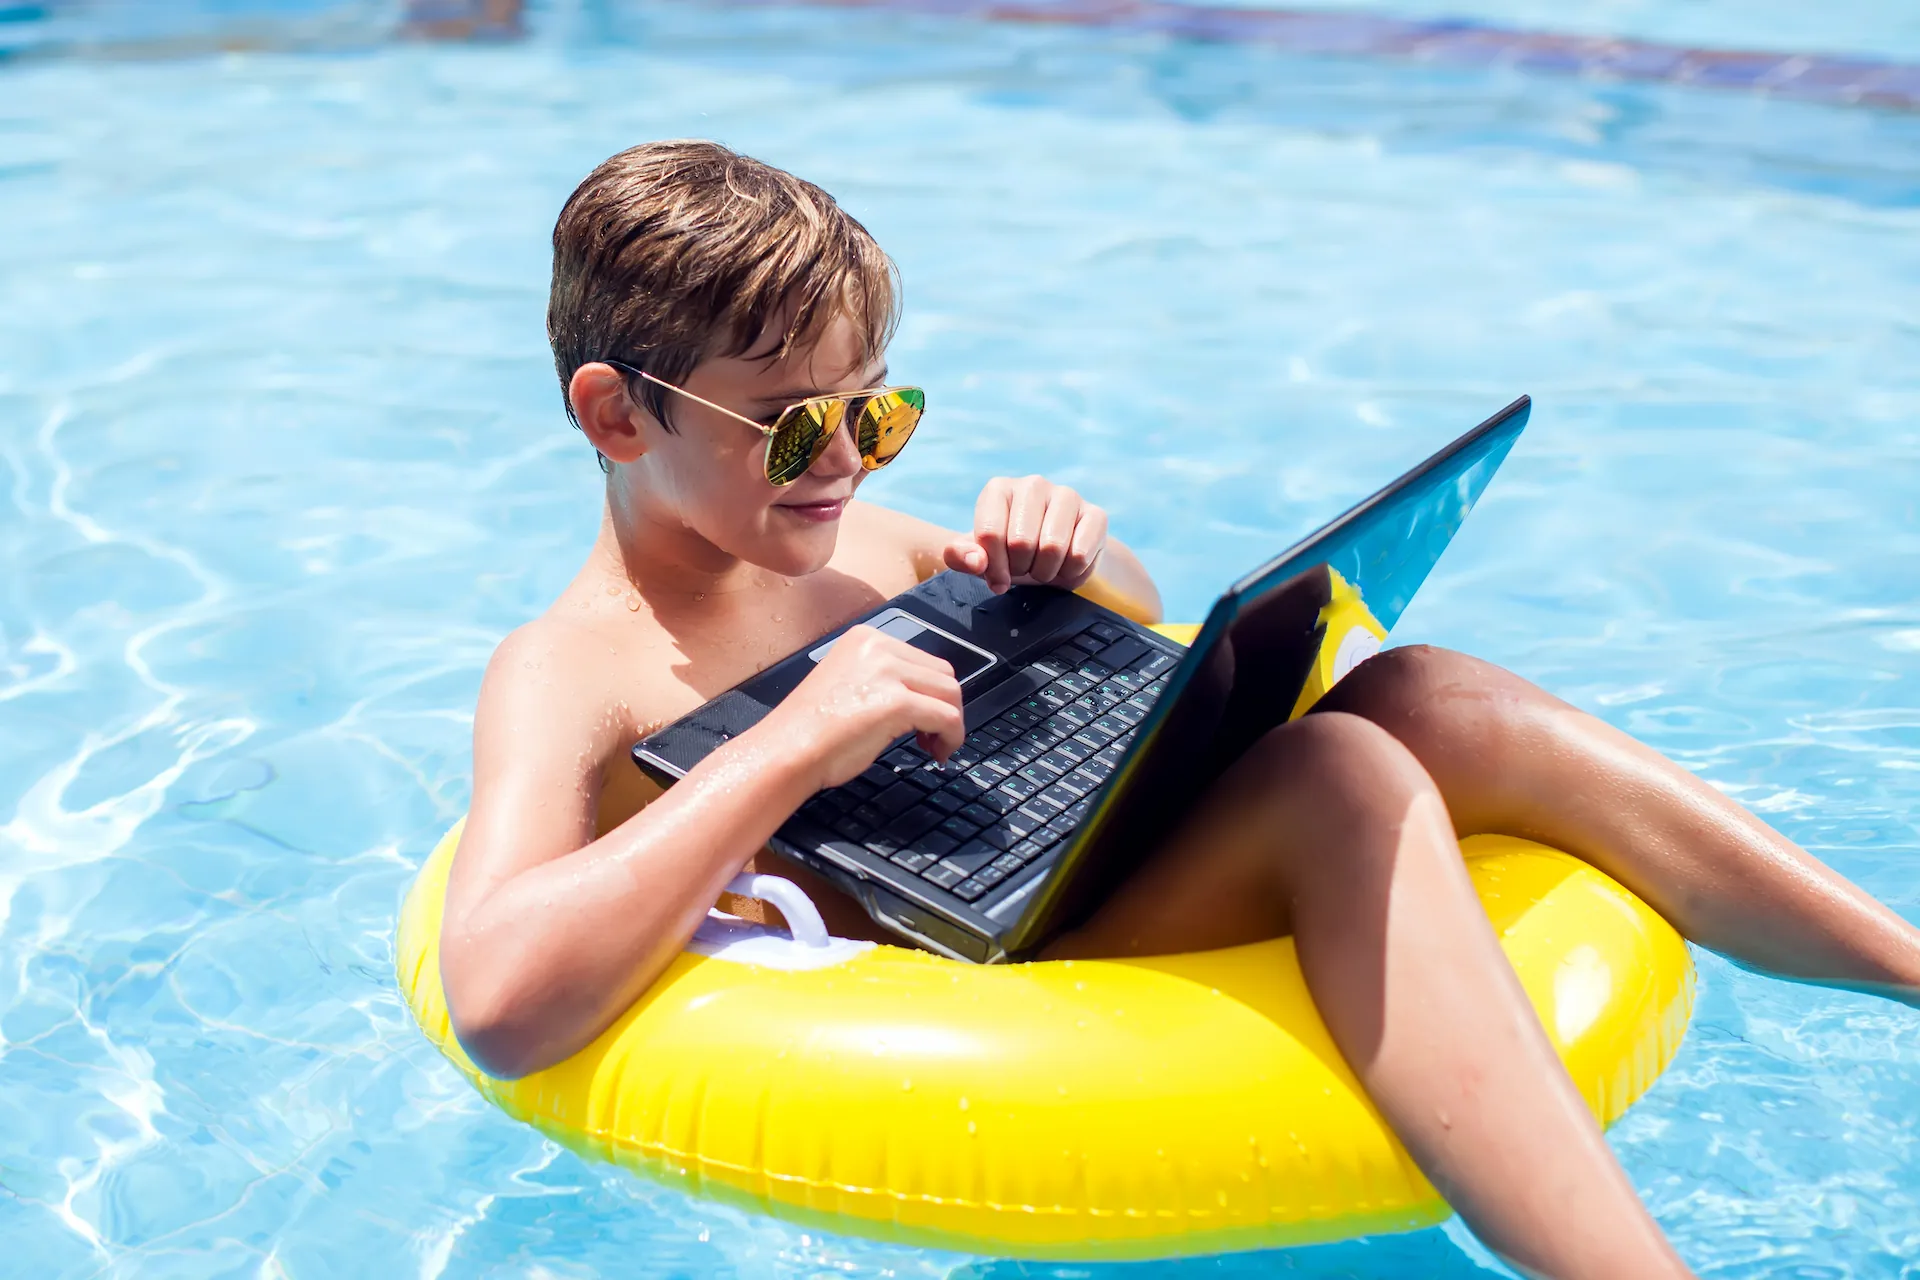 A swimmer wearing sunglasses types on a laptop resting on their lap while sitting in a round